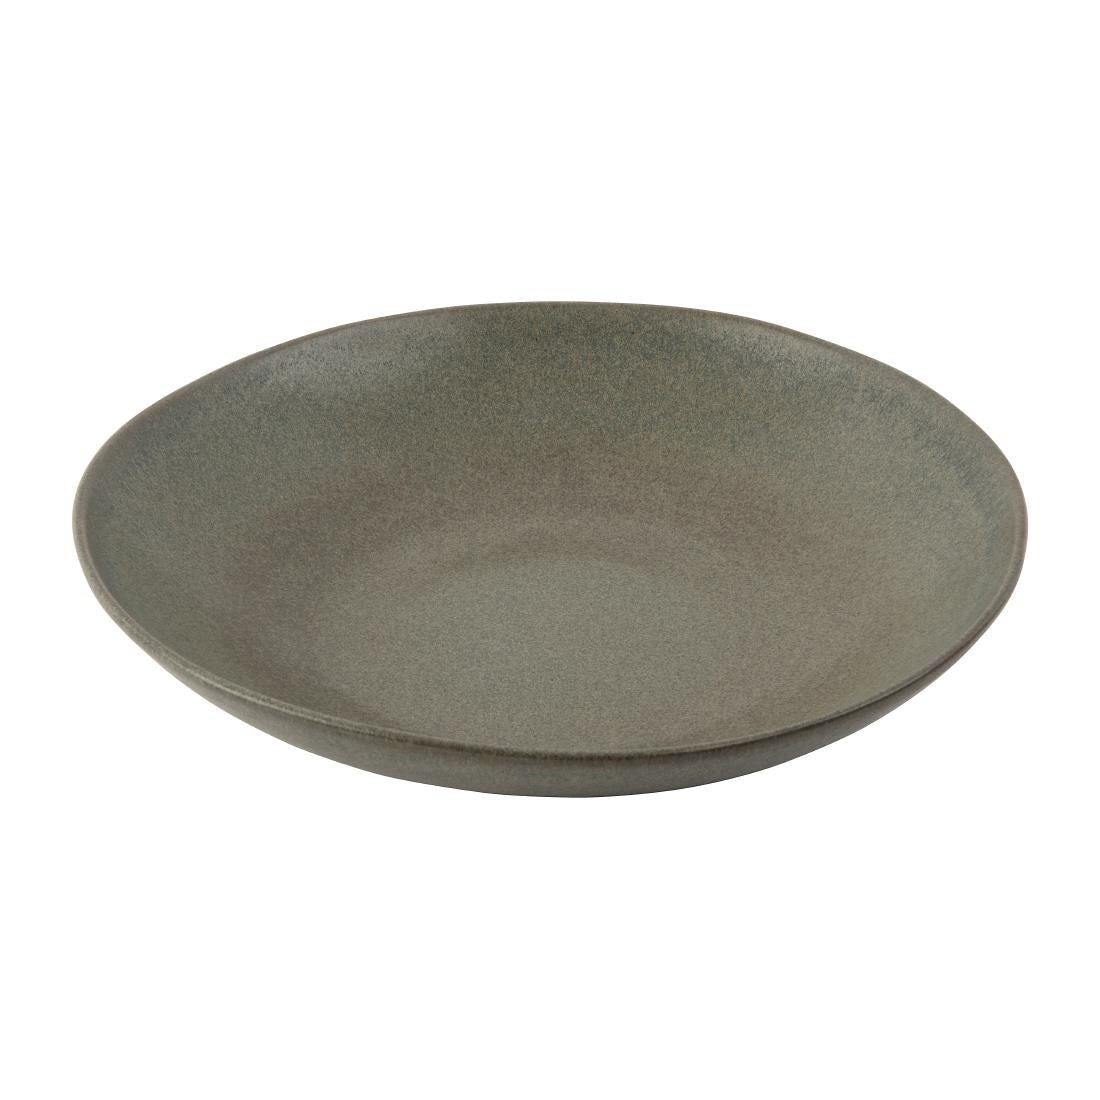 FC711 Olympia Build-a-Bowl Green Flat Bowls 250mm (Pack of 4) JD Catering Equipment Solutions Ltd